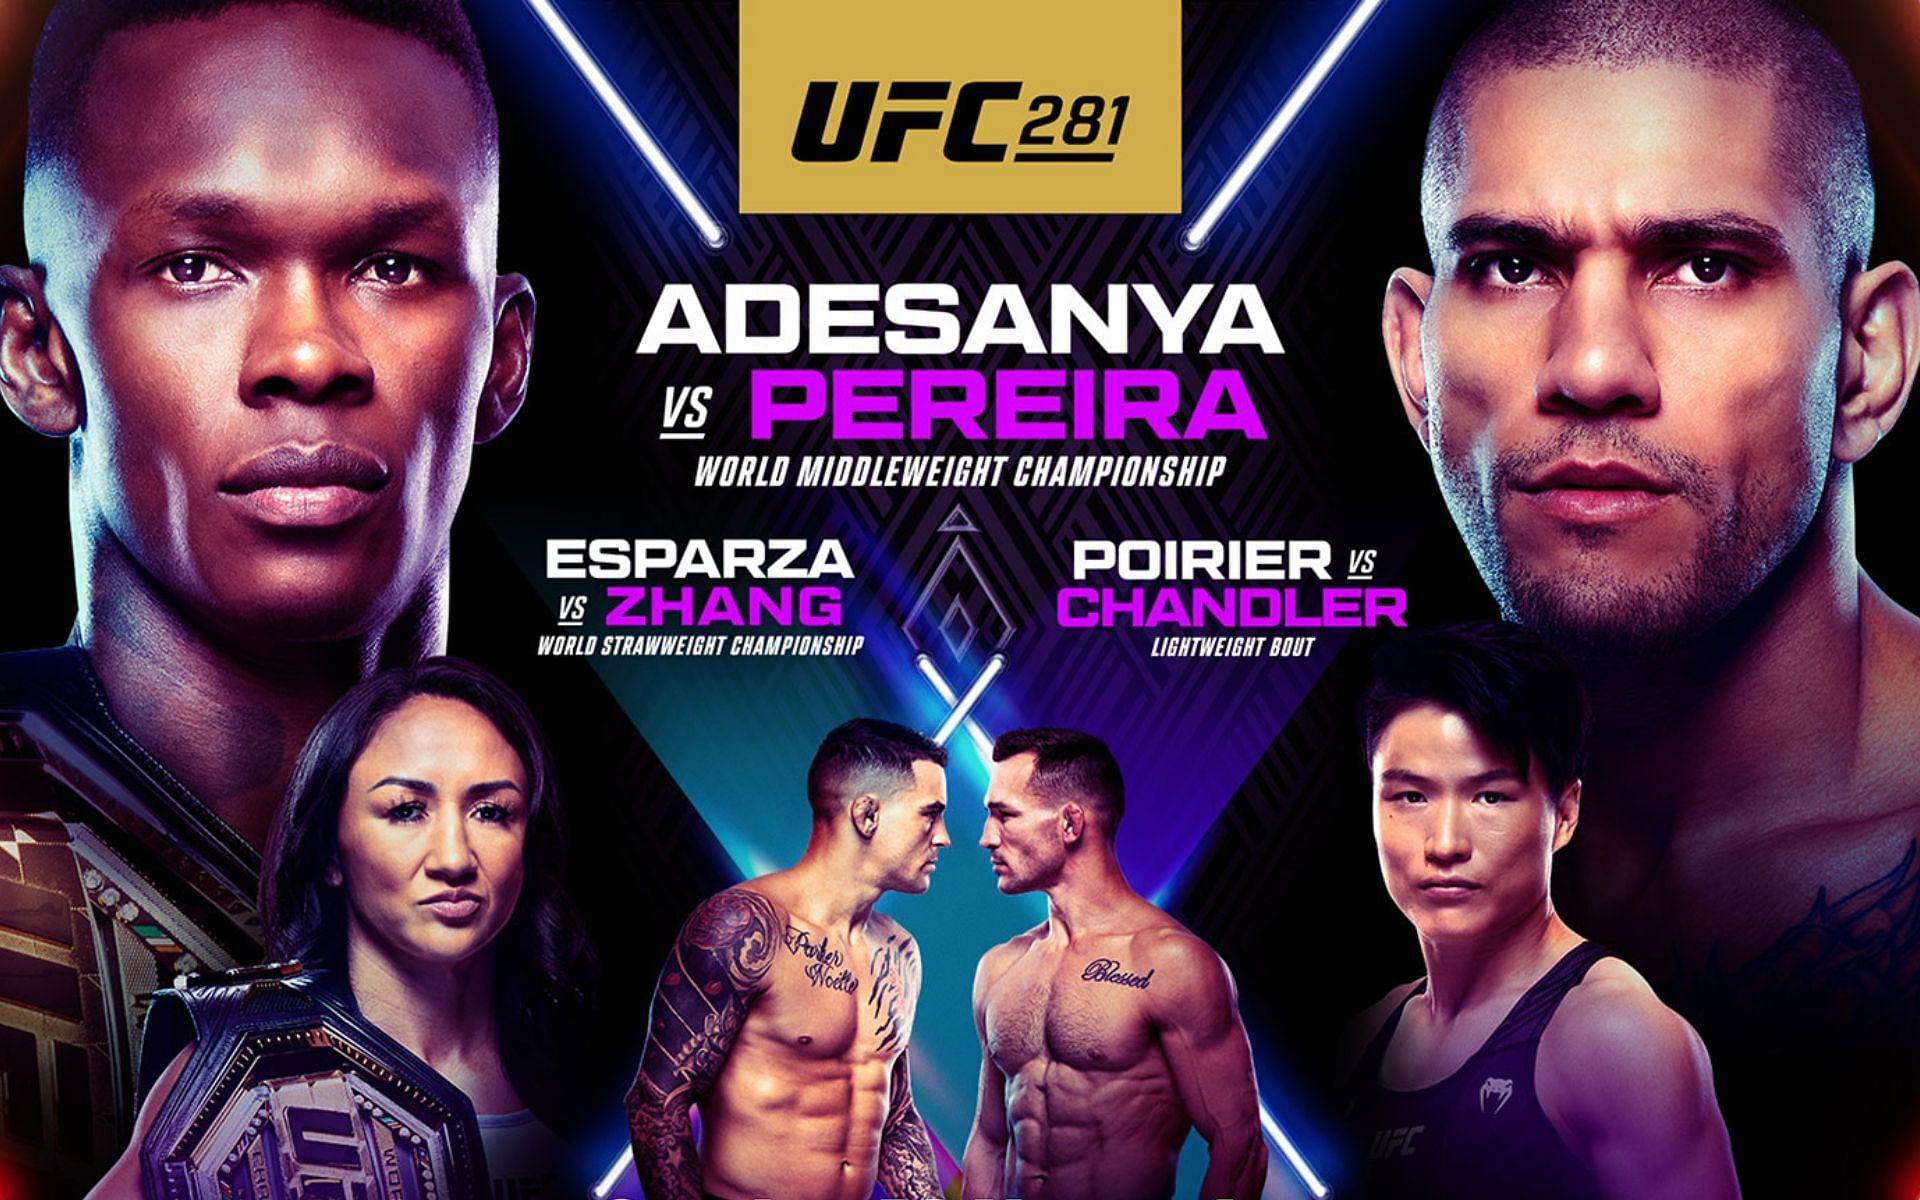 UFC 281 fight card How many fights have been confirmed for the